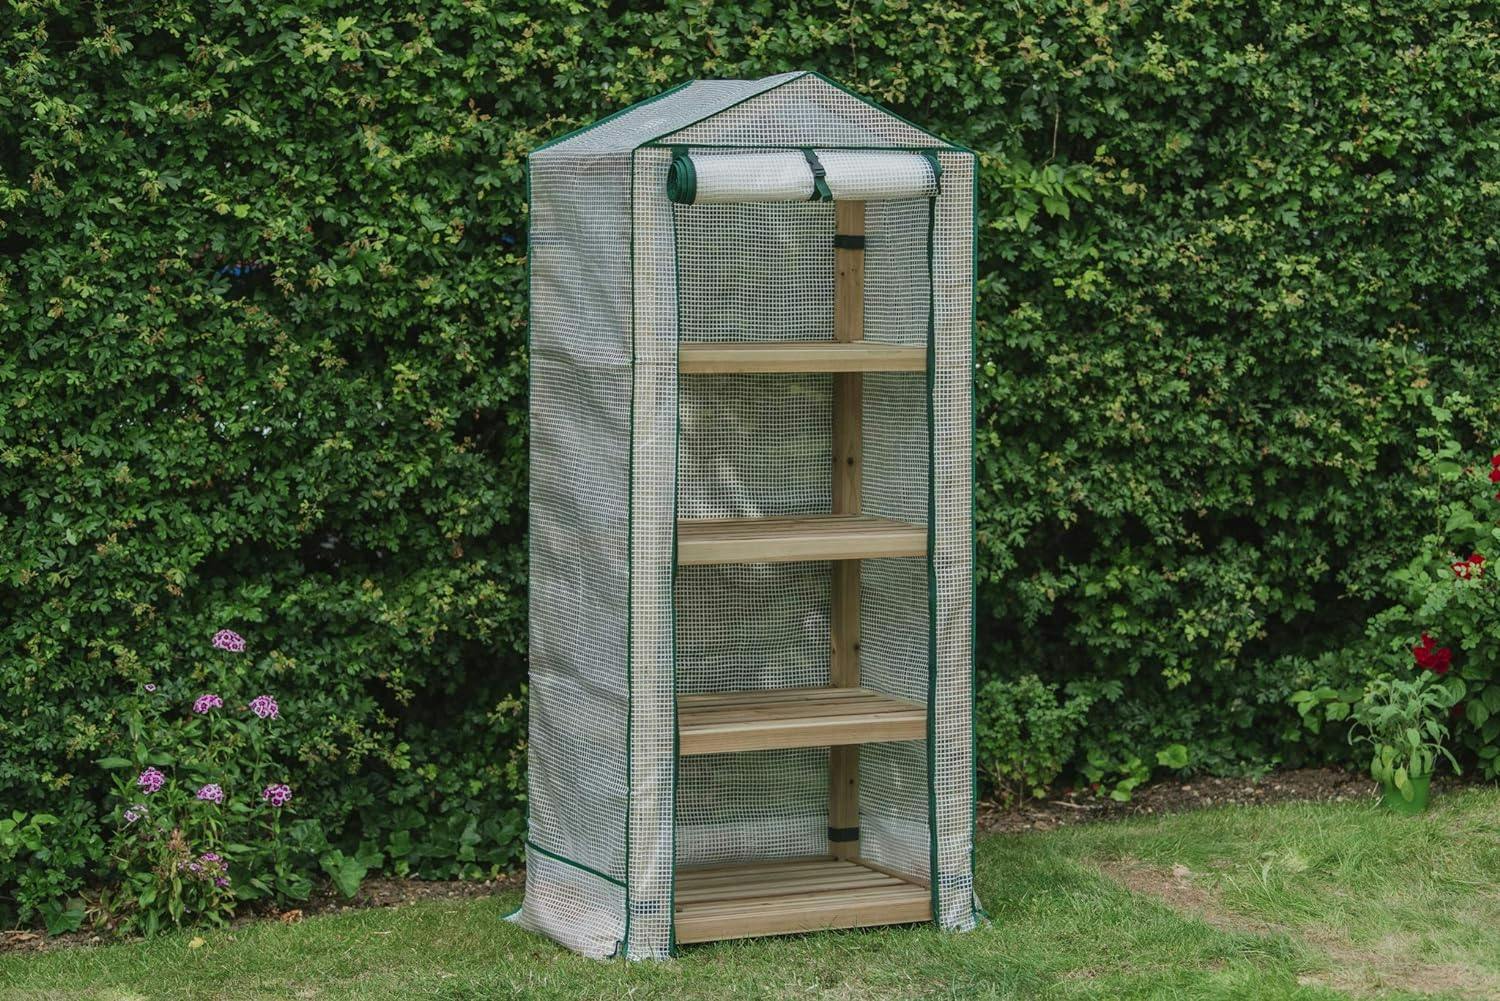 Gardman Elegance 24"x19" Wooden 4-Tier Greenhouse with UV Treated Cover